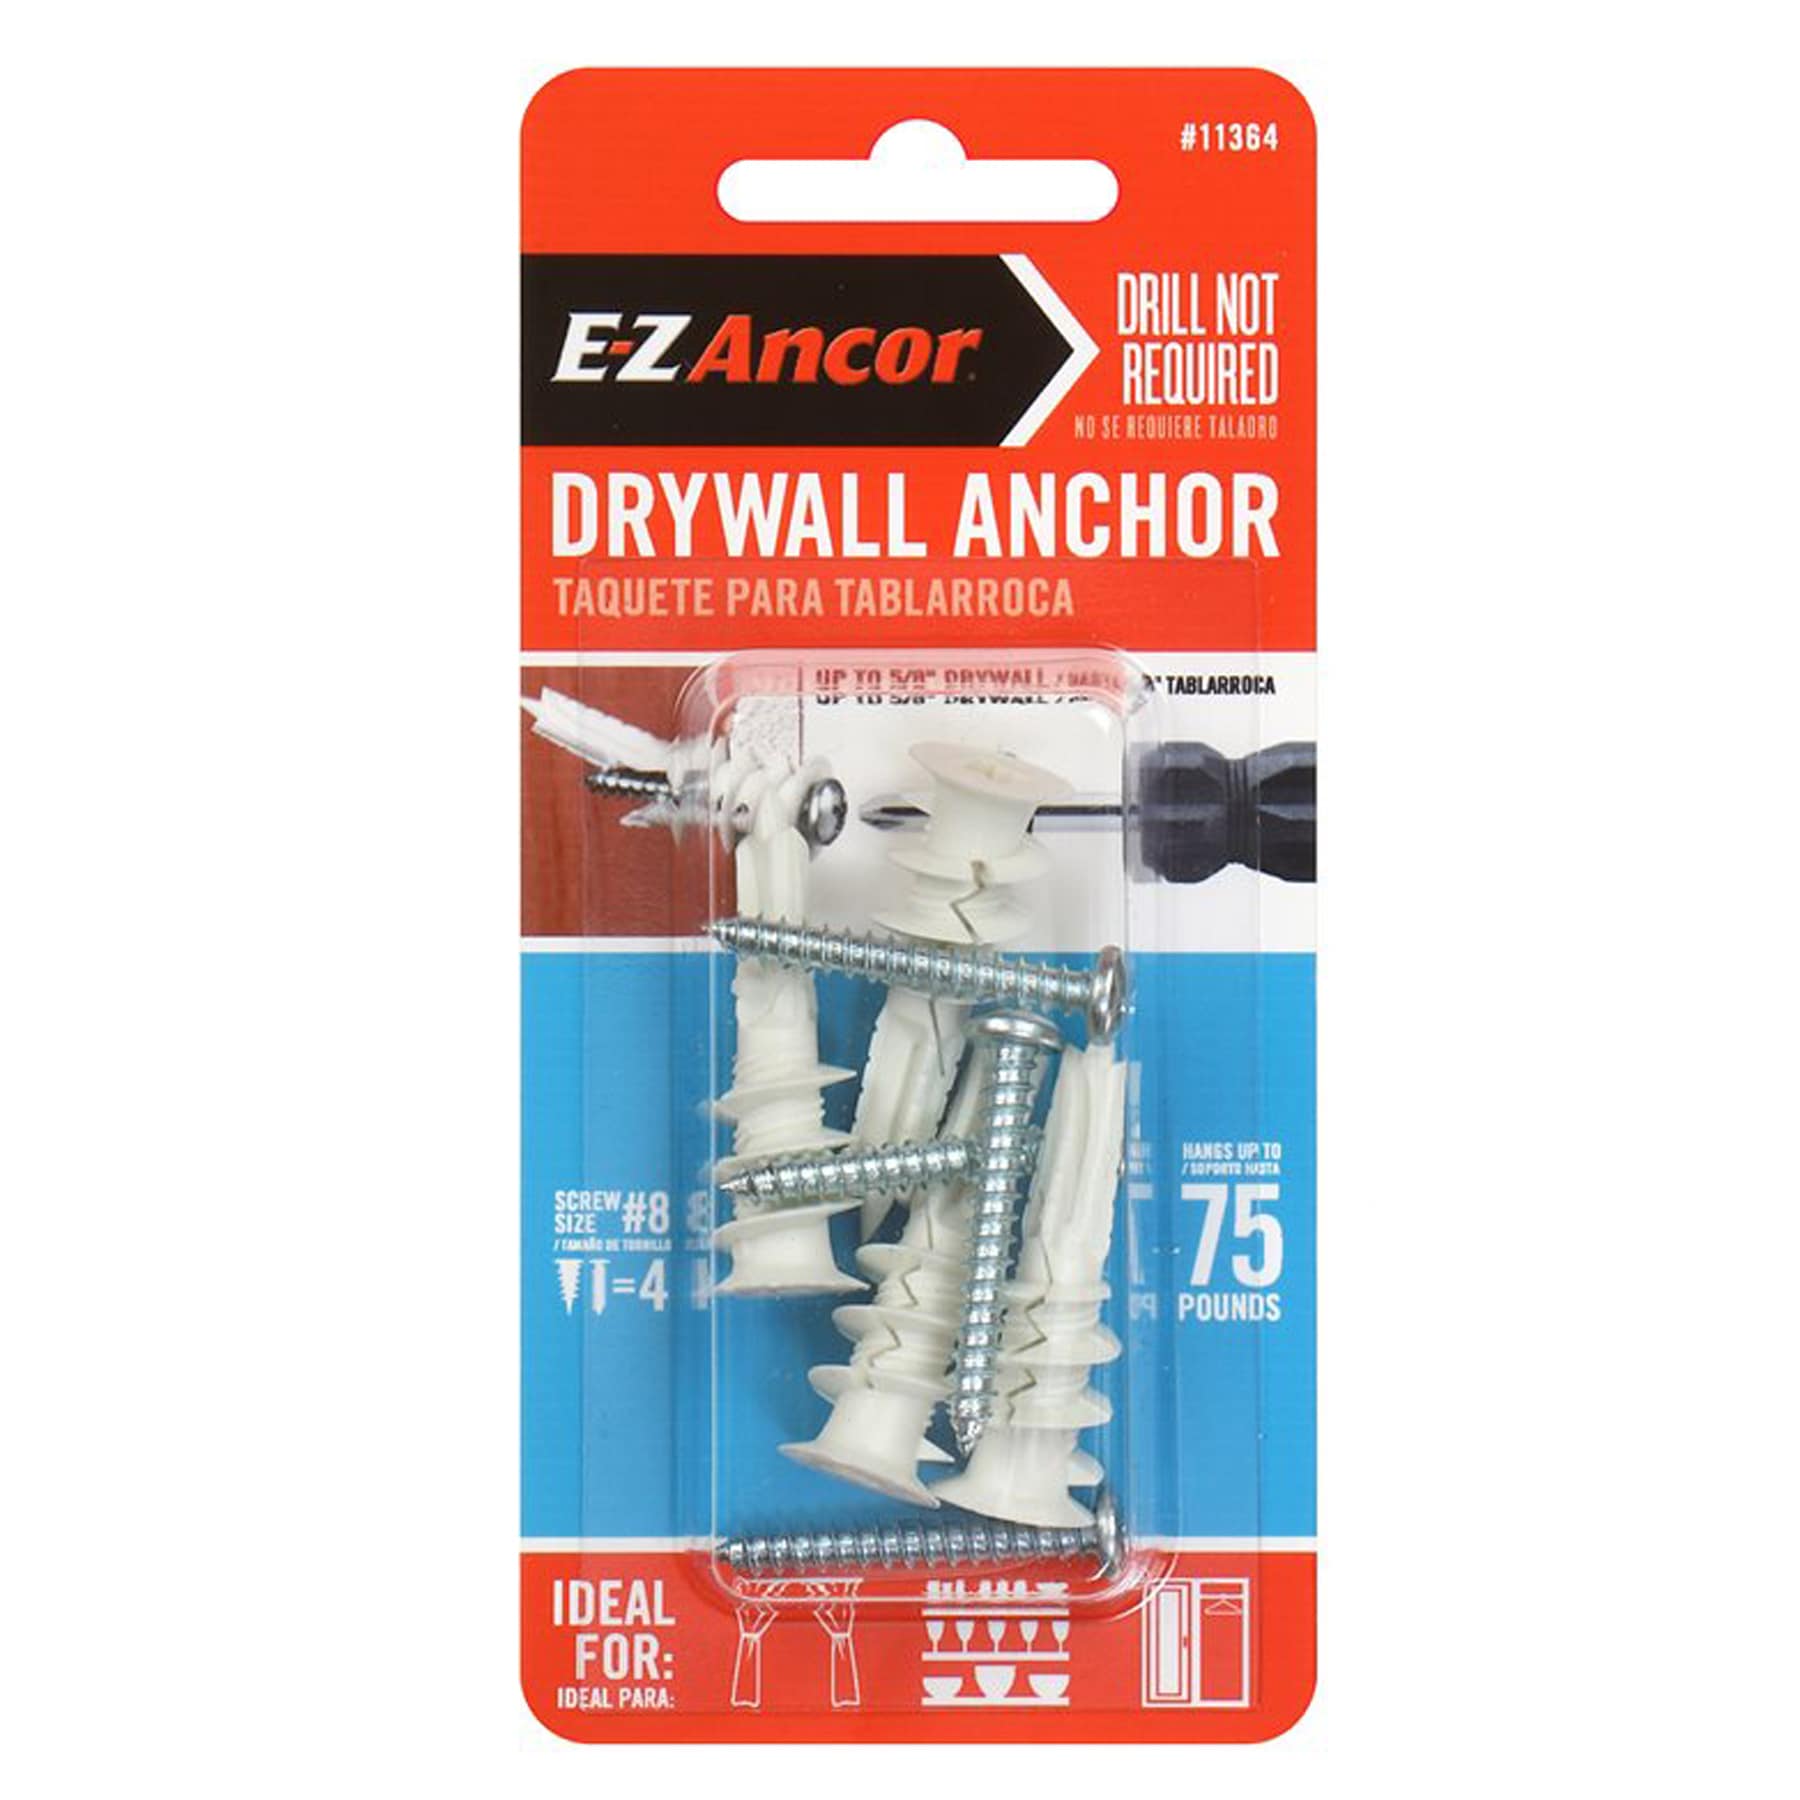 Self Drilling Dry Wall Zinc Anchors and Phillips Metal Screws Kit